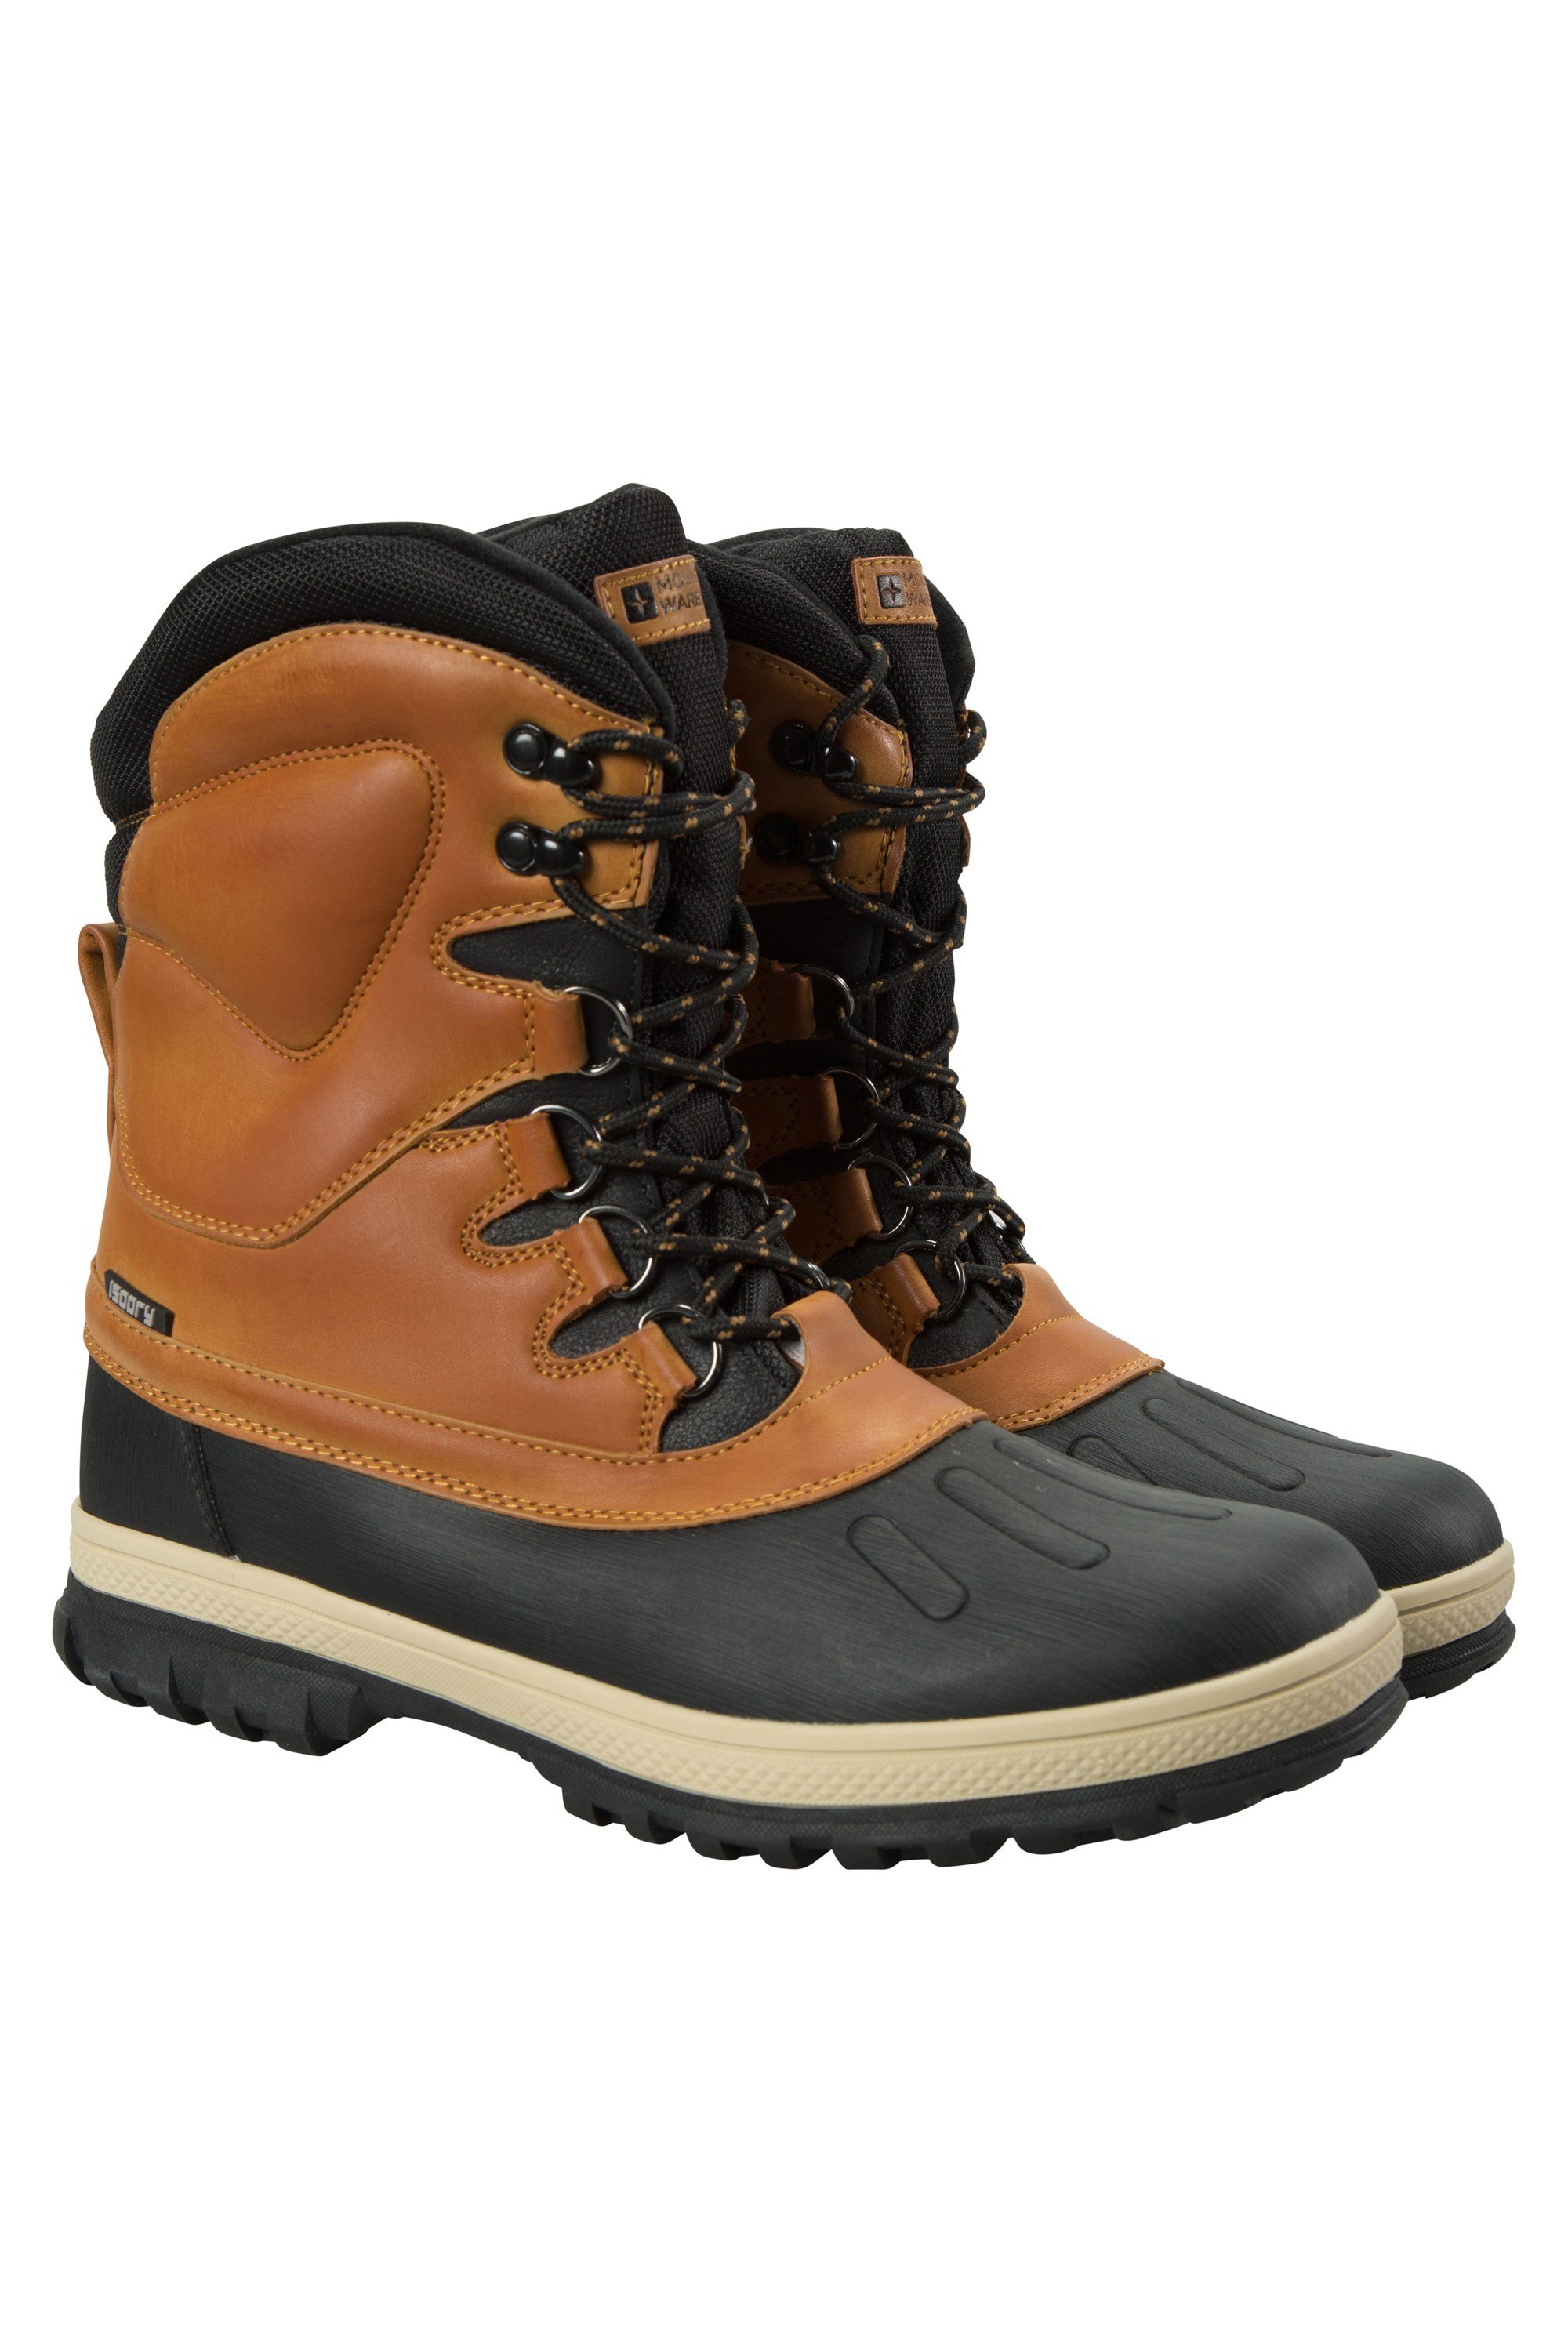 Concentratie hemel interval Arctic Thermal Mens Snow Boots | Mountain Warehouse US